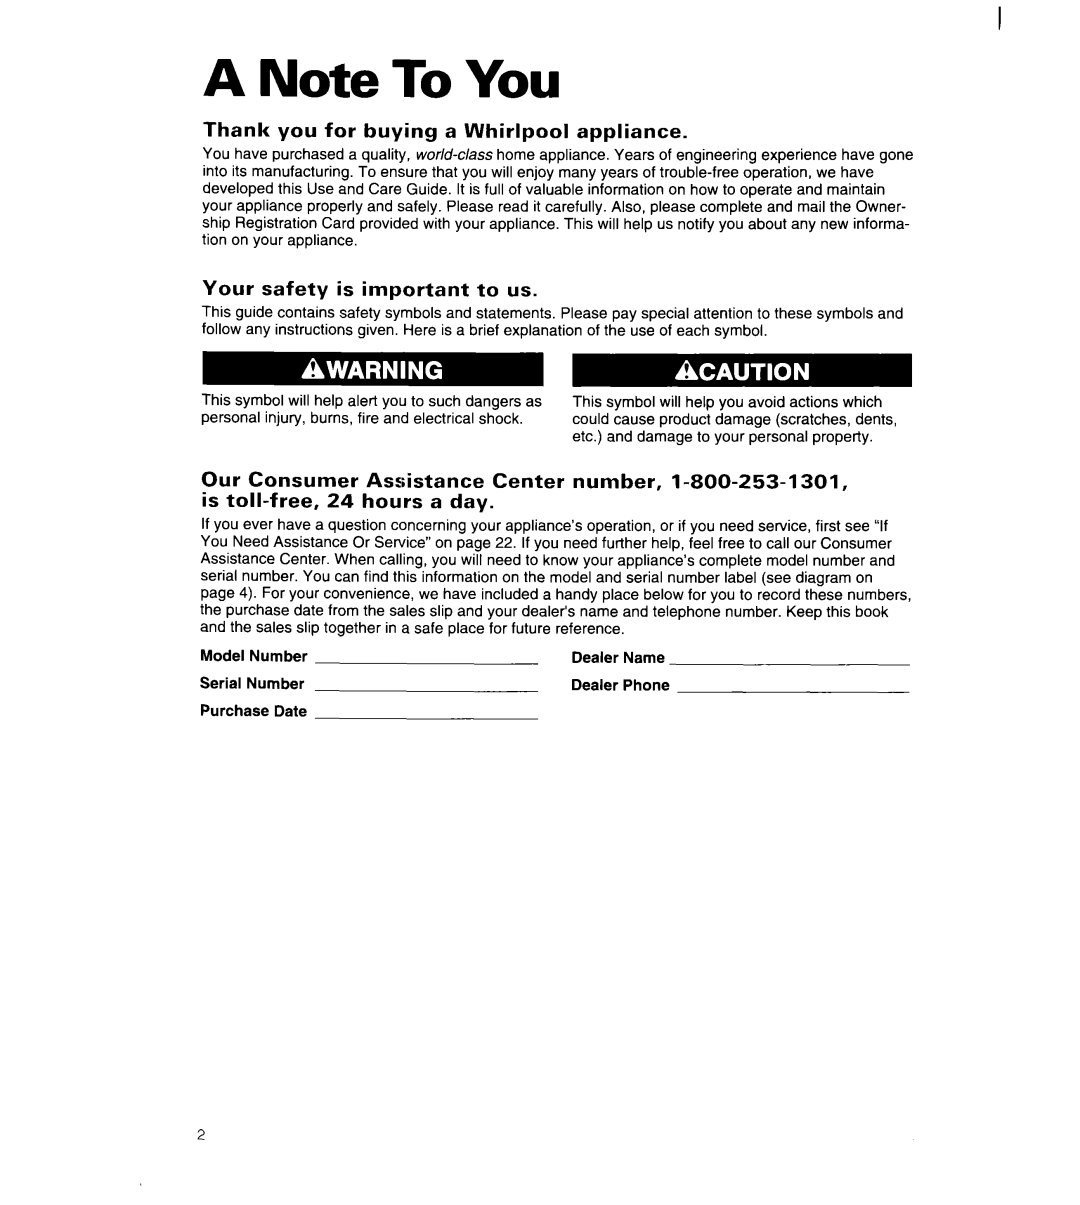 Whirlpool 8ED22PW manual A Note To You 